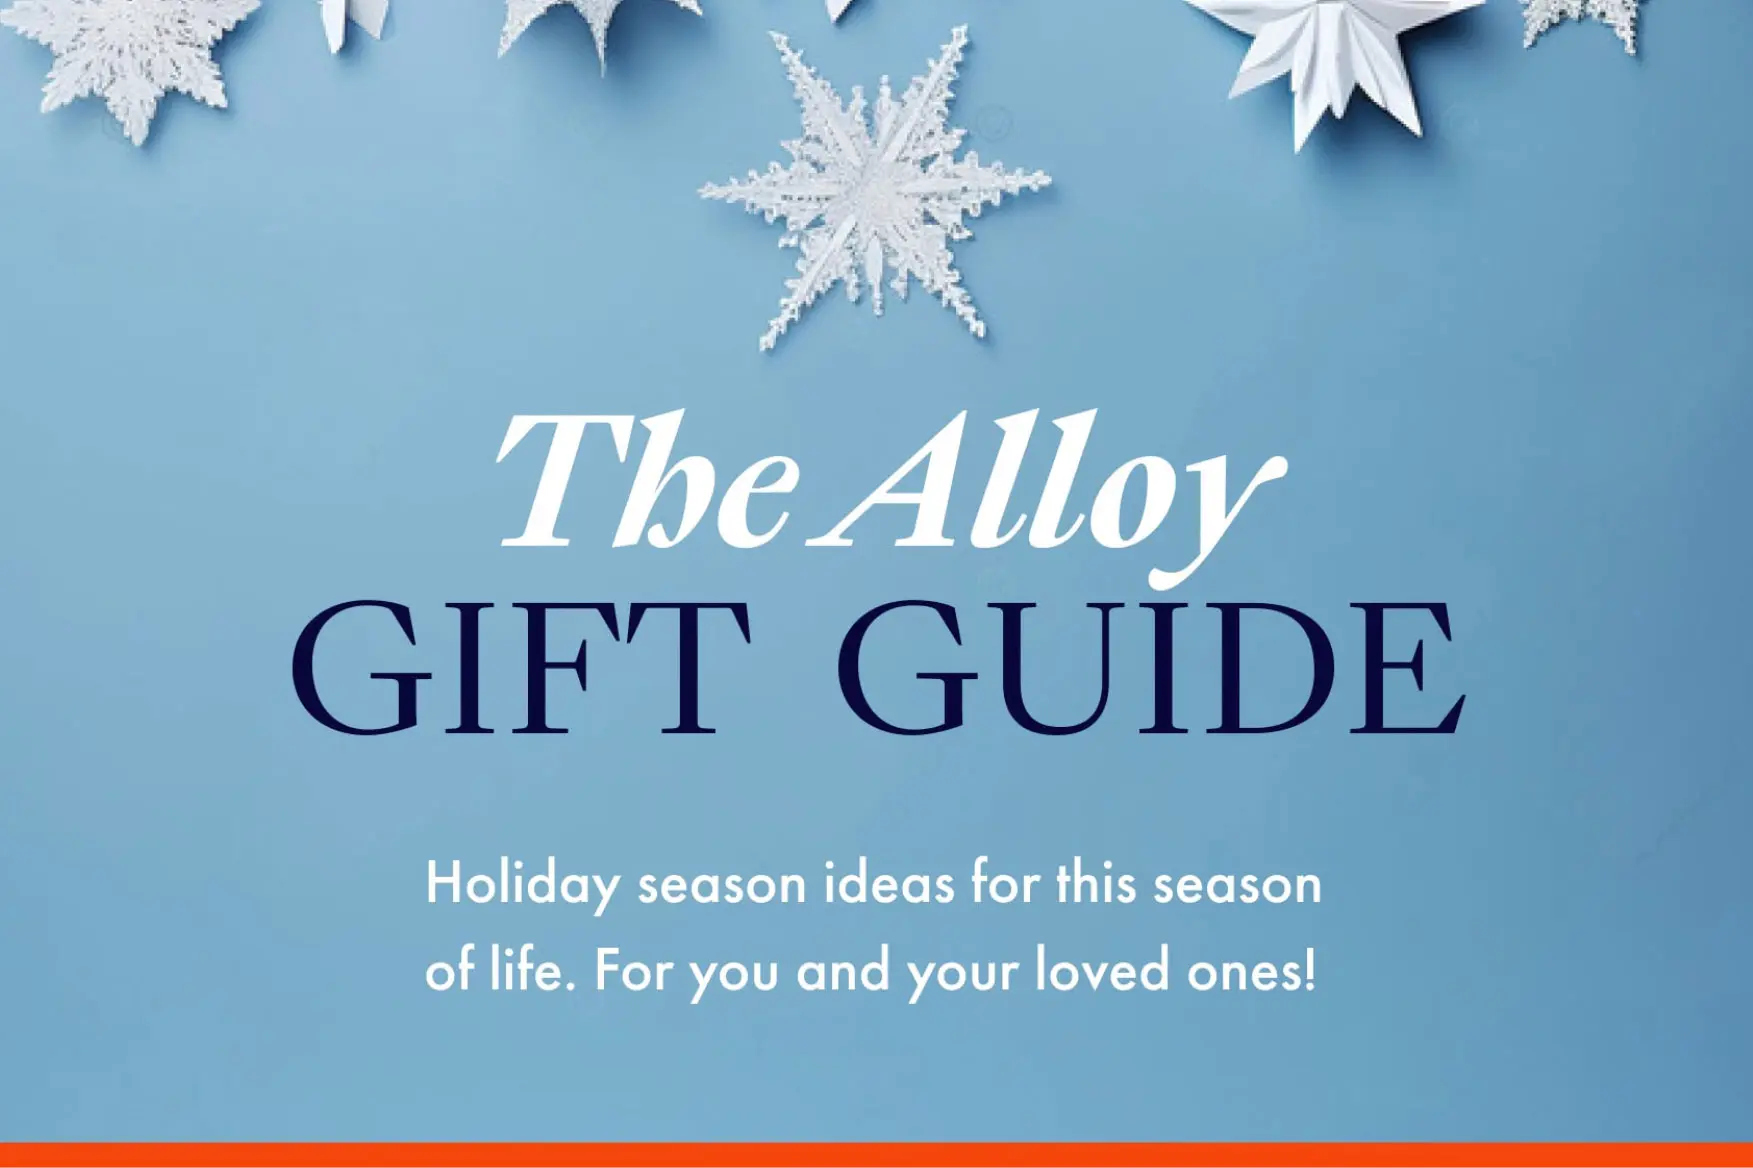 Graphic with snowflakes on blue background, text reading: The Alloy Gift Guide